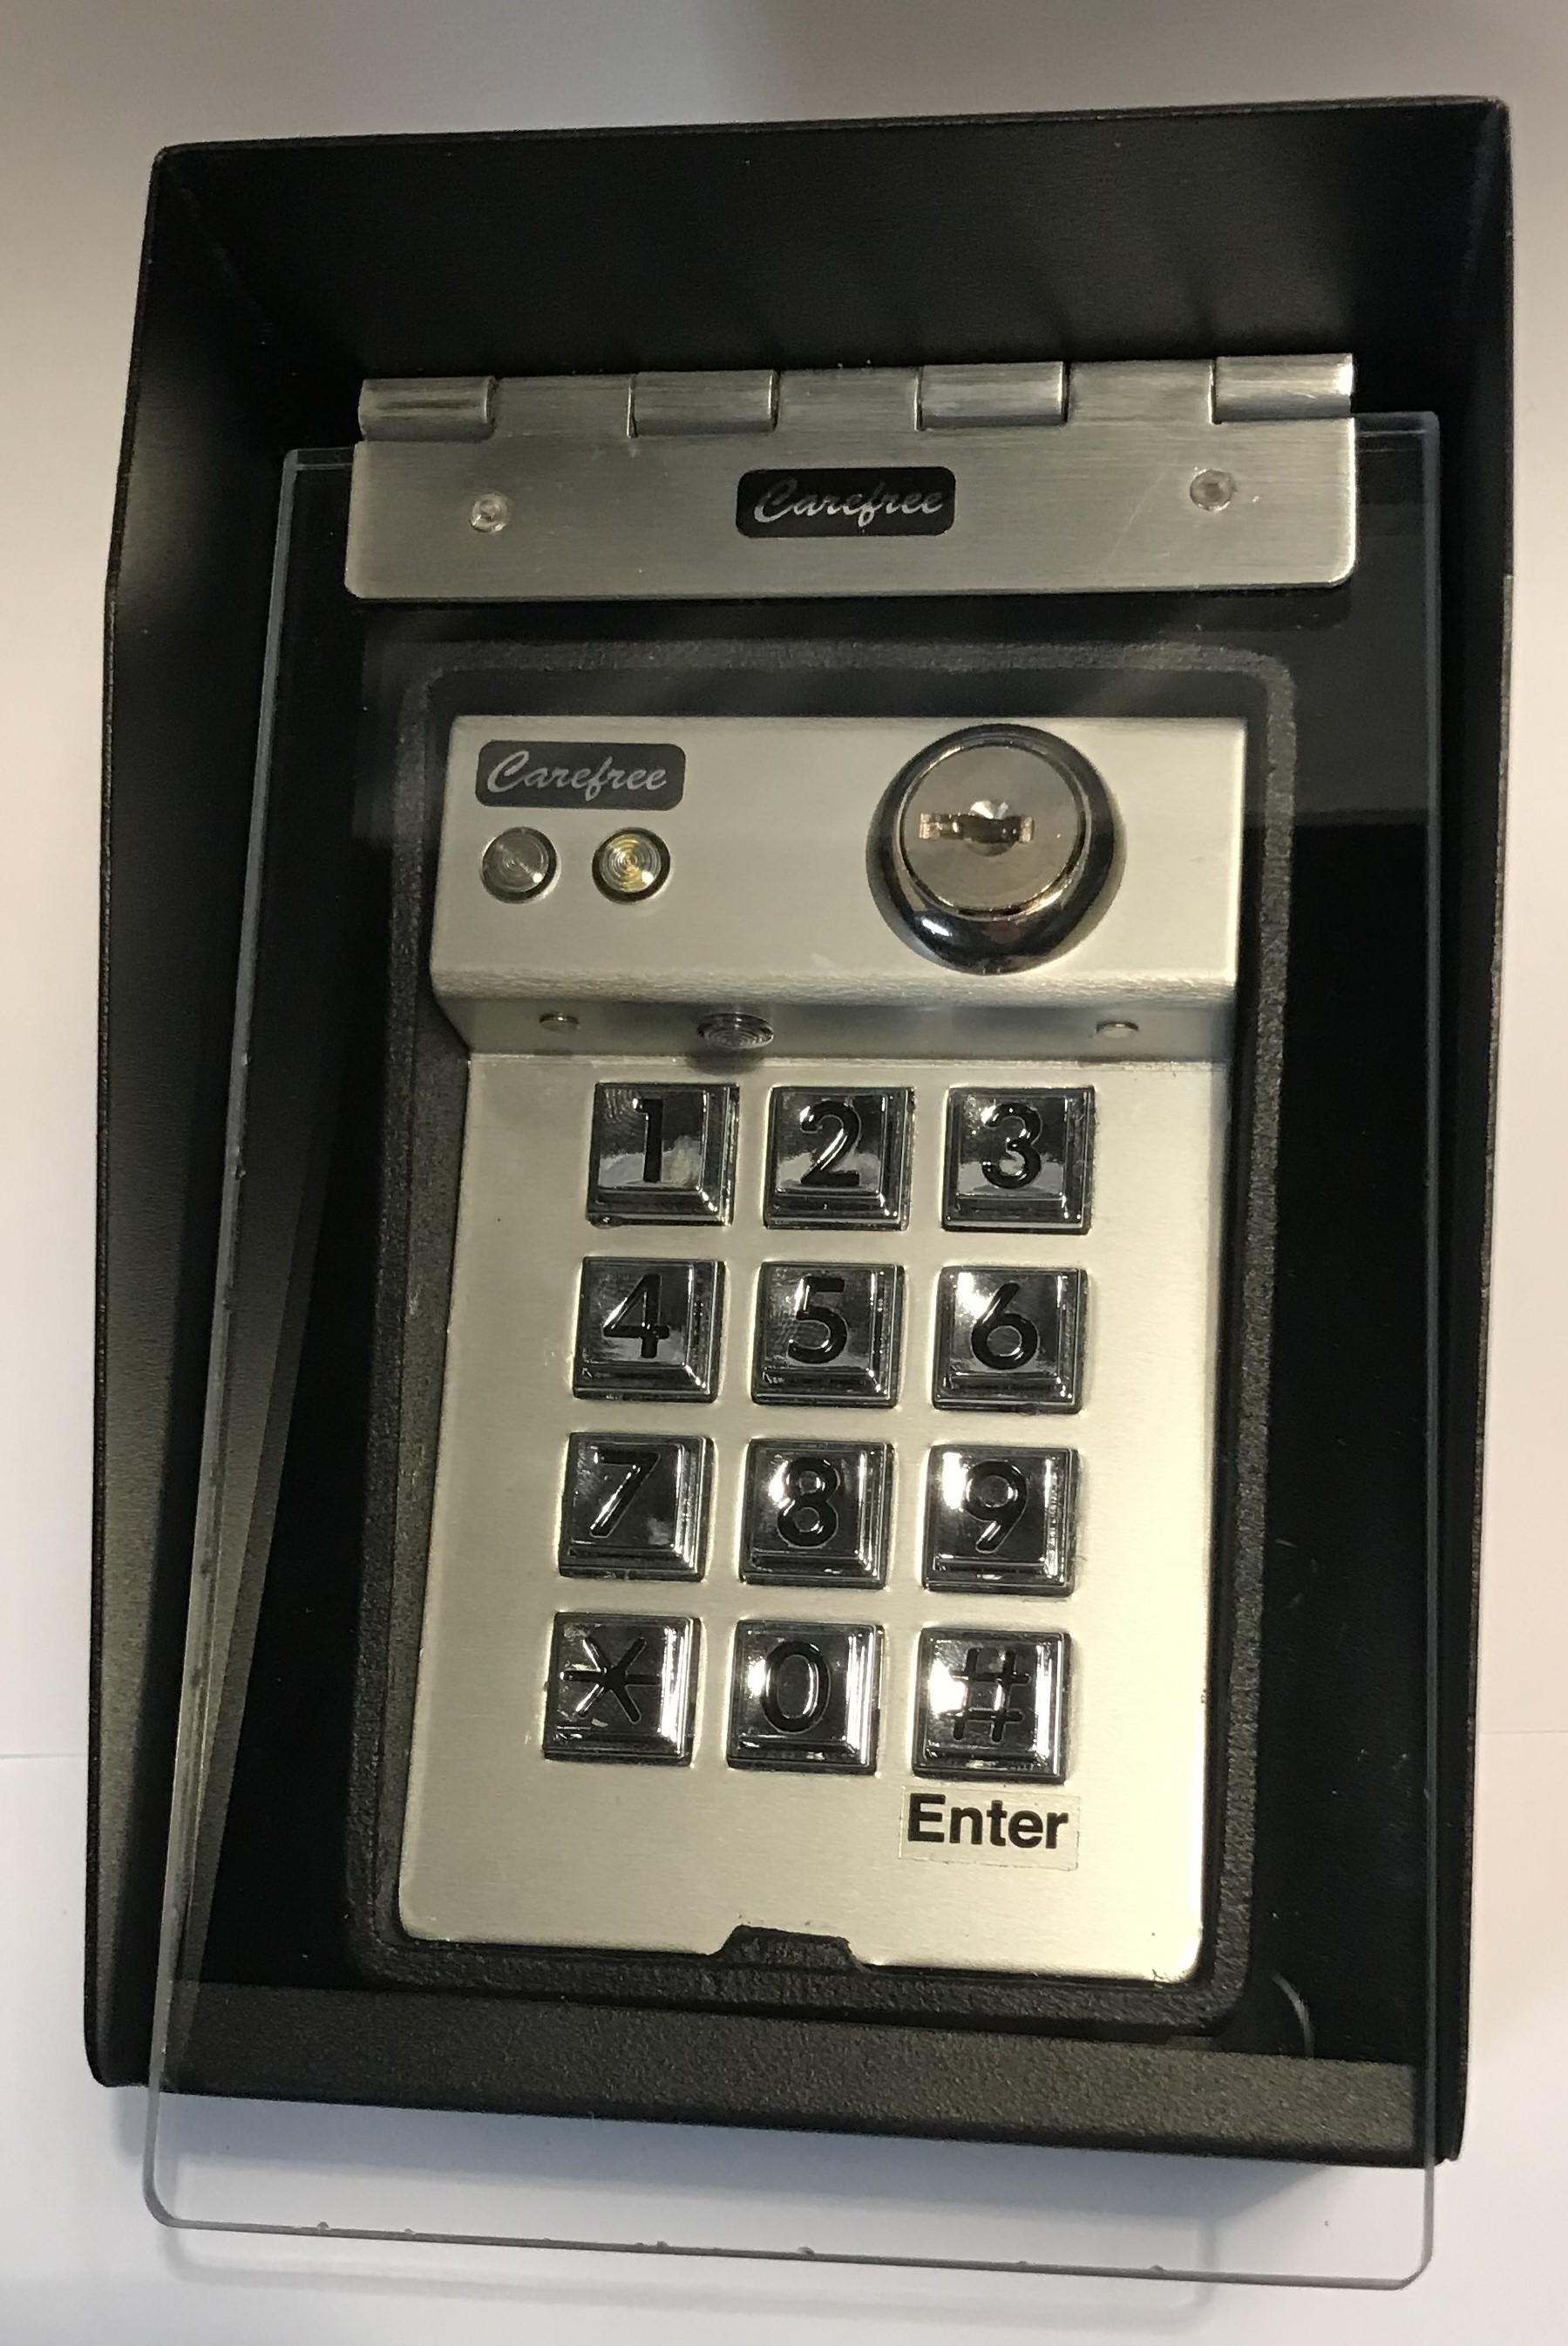 *Shown with optional 1050 keypad